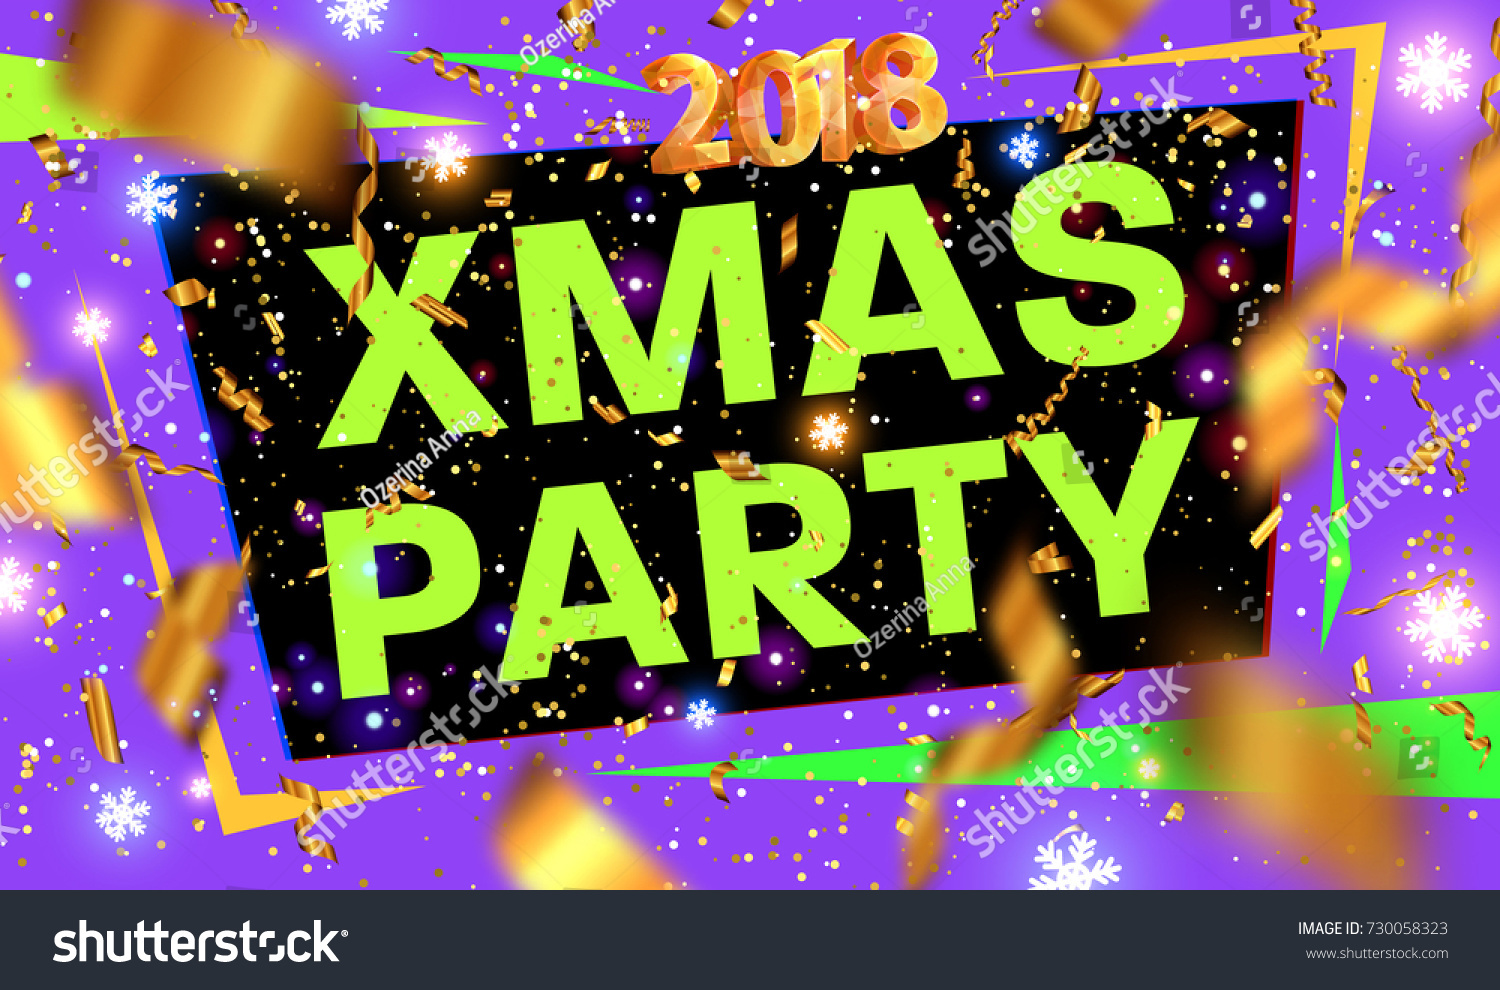 Christmas 2018 party poster template | Xmas and New Year disco placard | Gold glitter and glowing snowflakes | Vector illustration #730058323